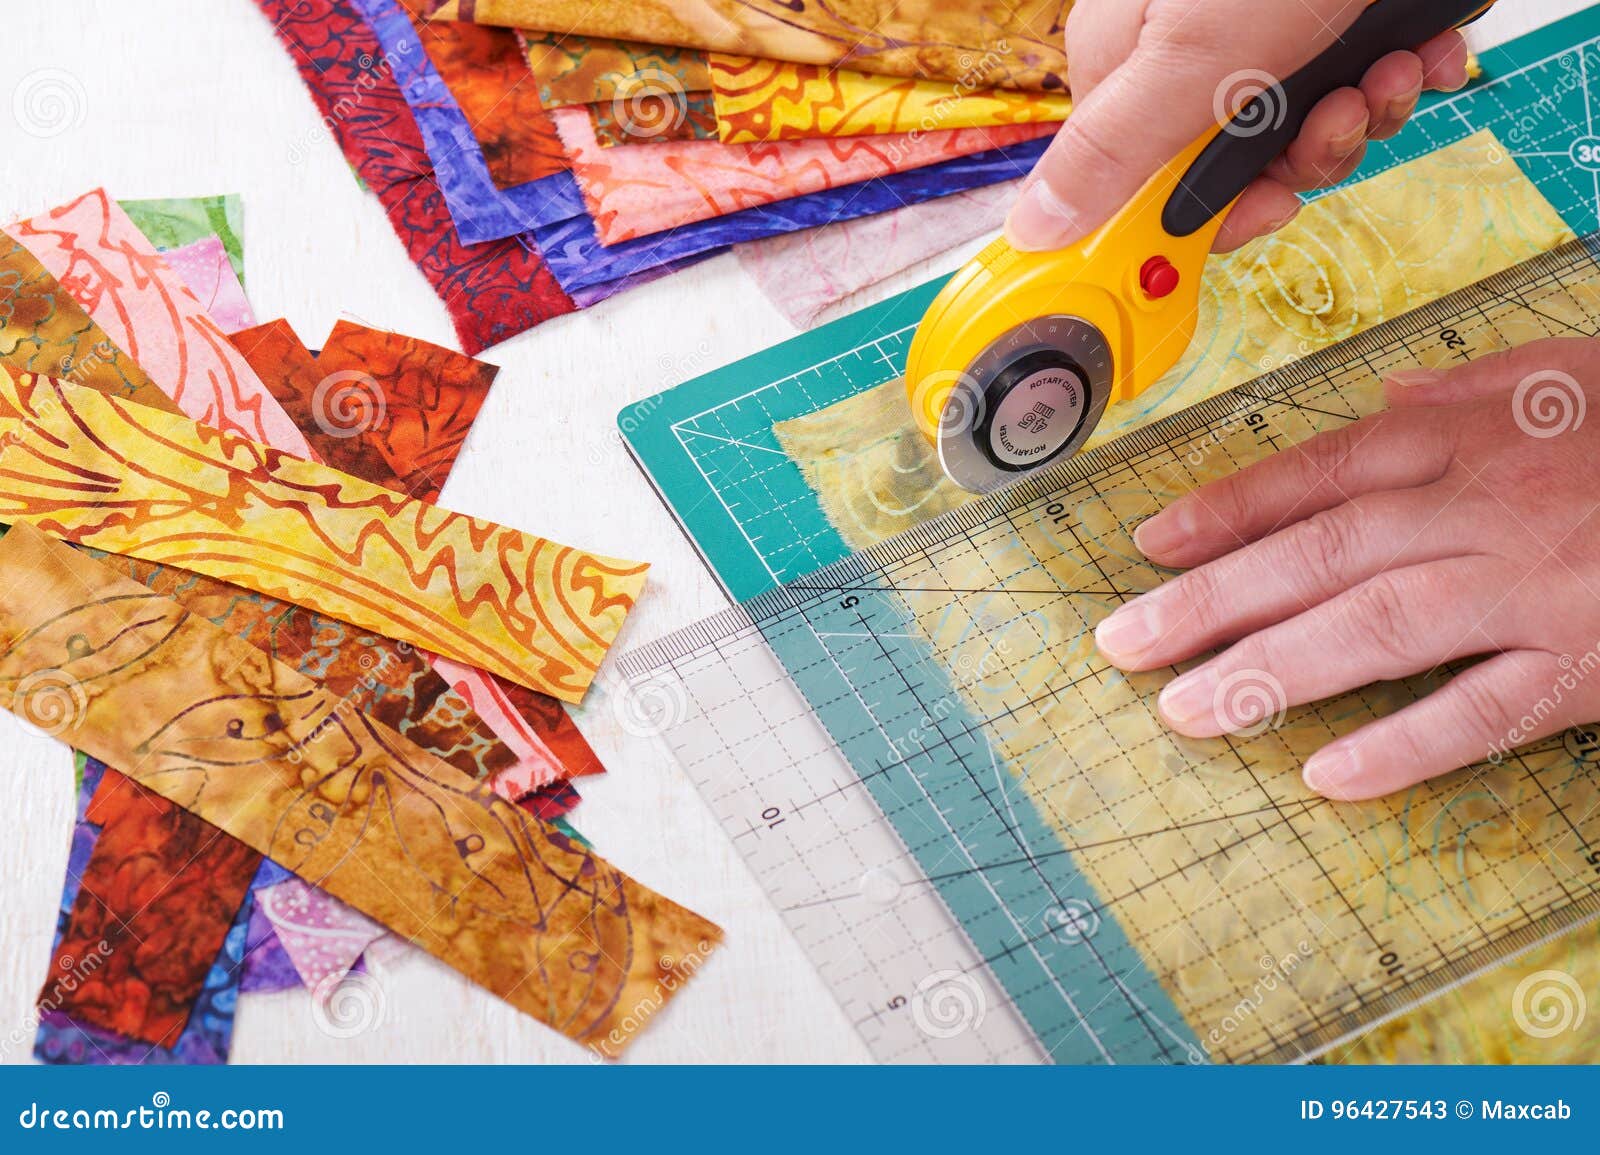 Sewing Cutting Board Closeup Stock Photo - Download Image Now